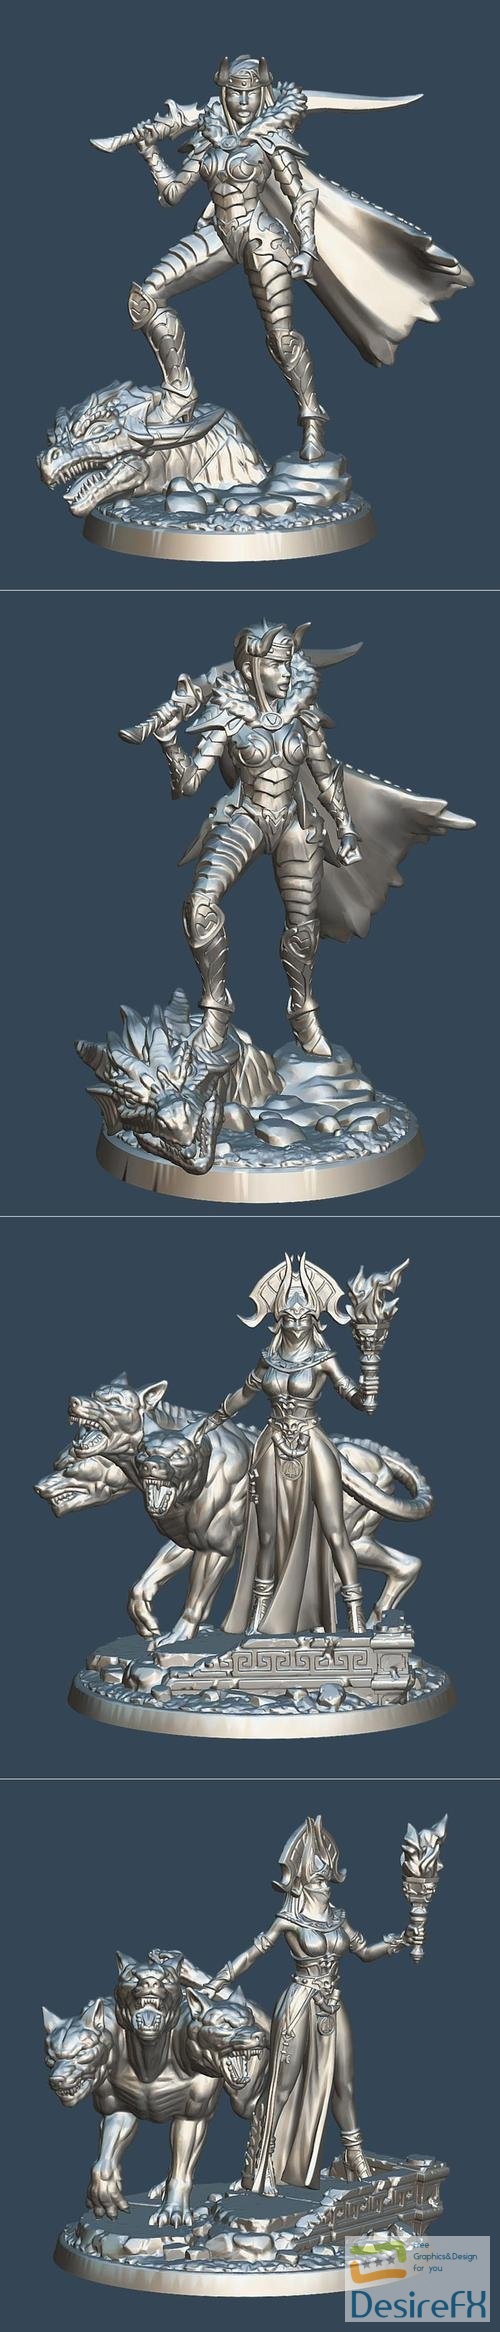 Download Dragon Slayer and Daughter of Persephone Necromancer 3D Print ...